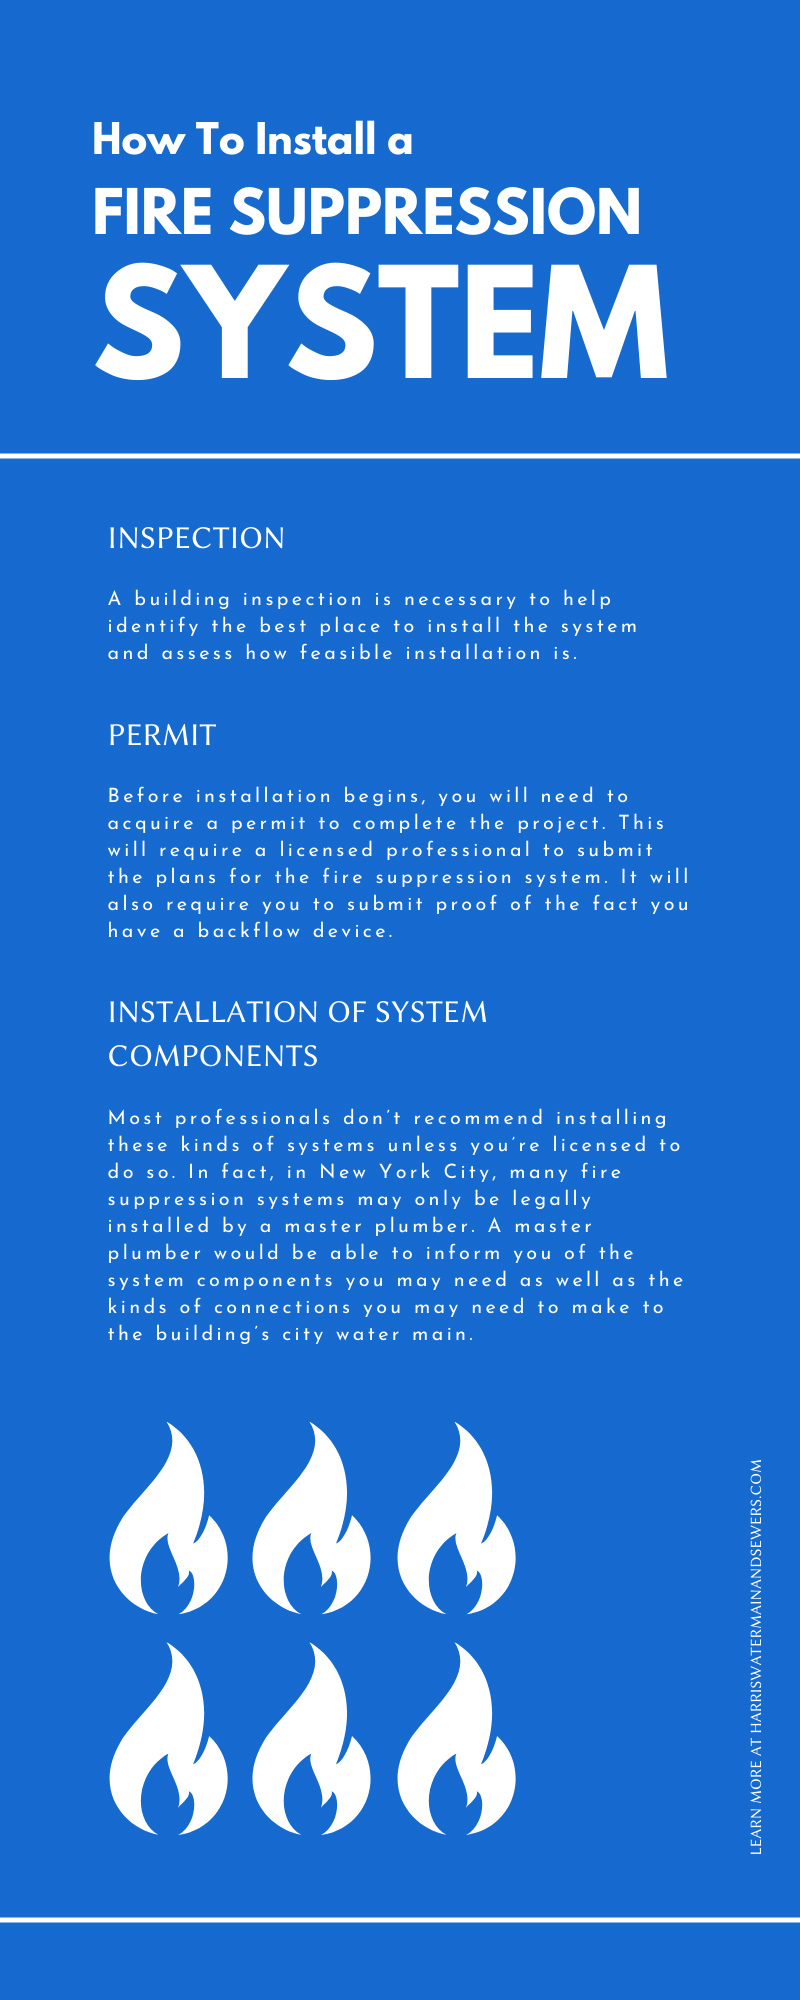 How To Install a Fire Suppression System